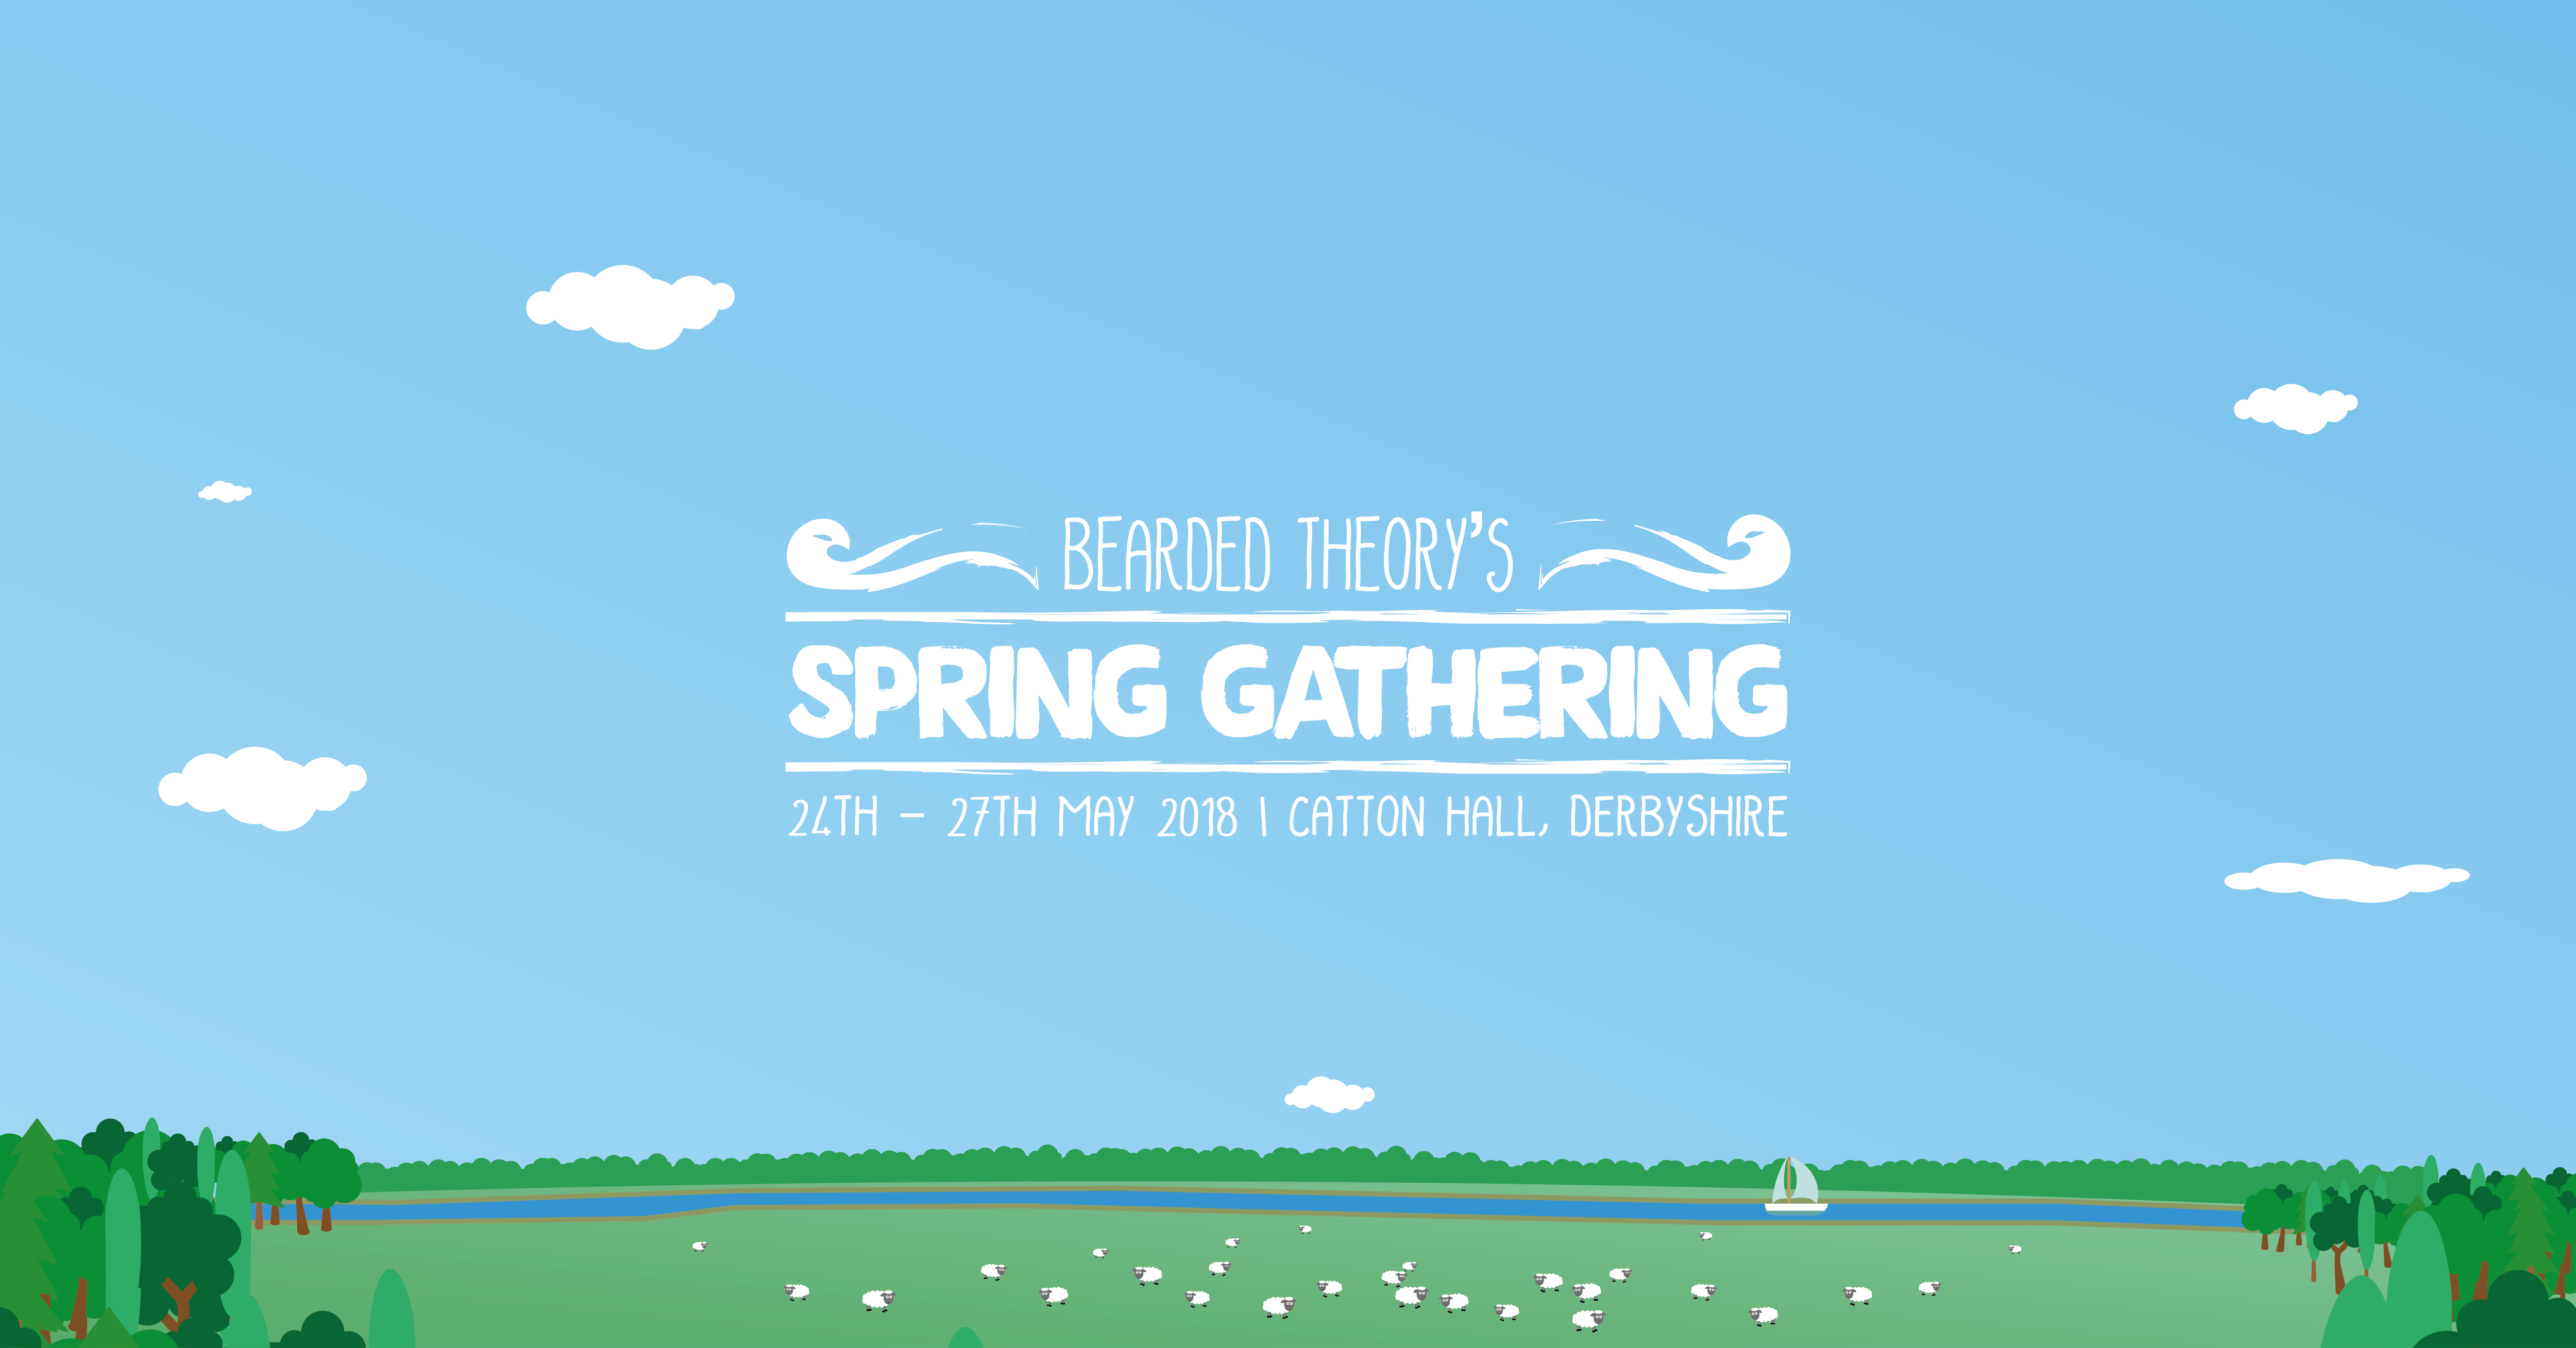 Bearded Theory’s Spring Gathering – Glasto without the Hikes? – Preview